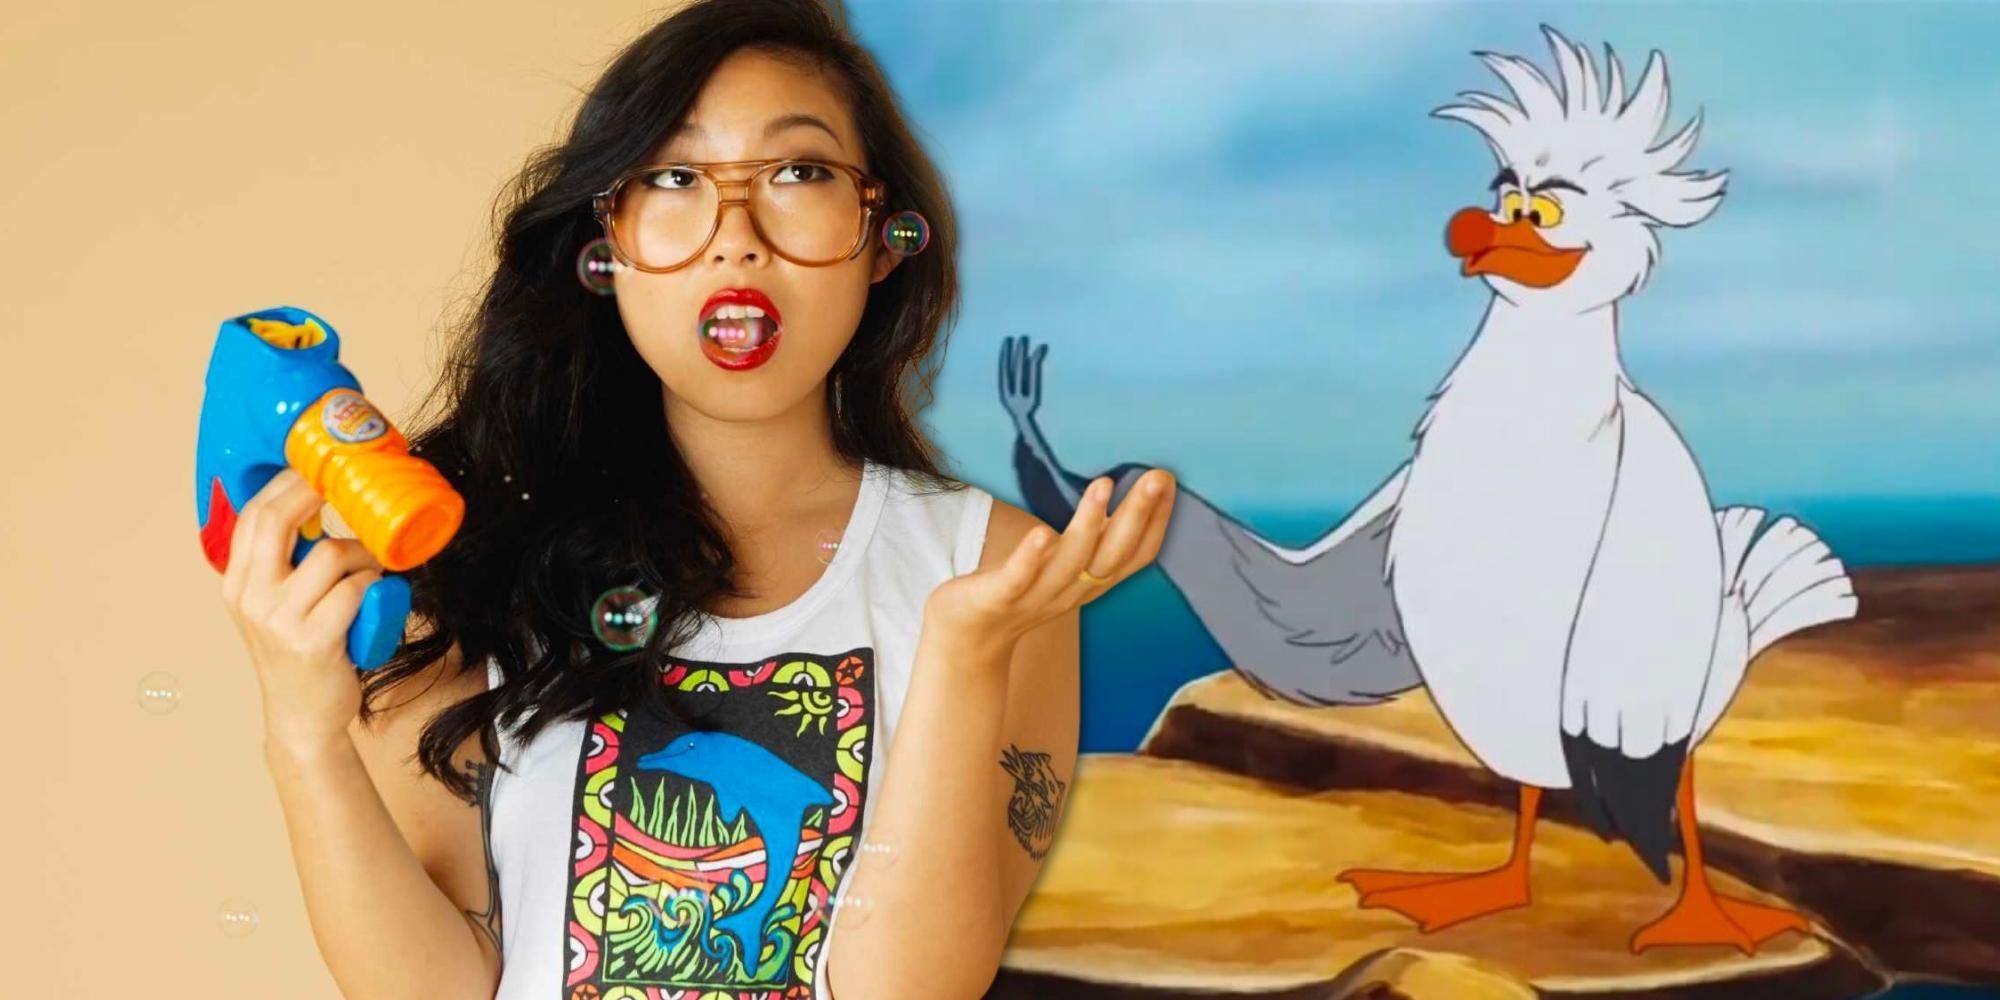 Awkwafina in front of a still of Scuttle from the Disney animated film the Little Mermaid